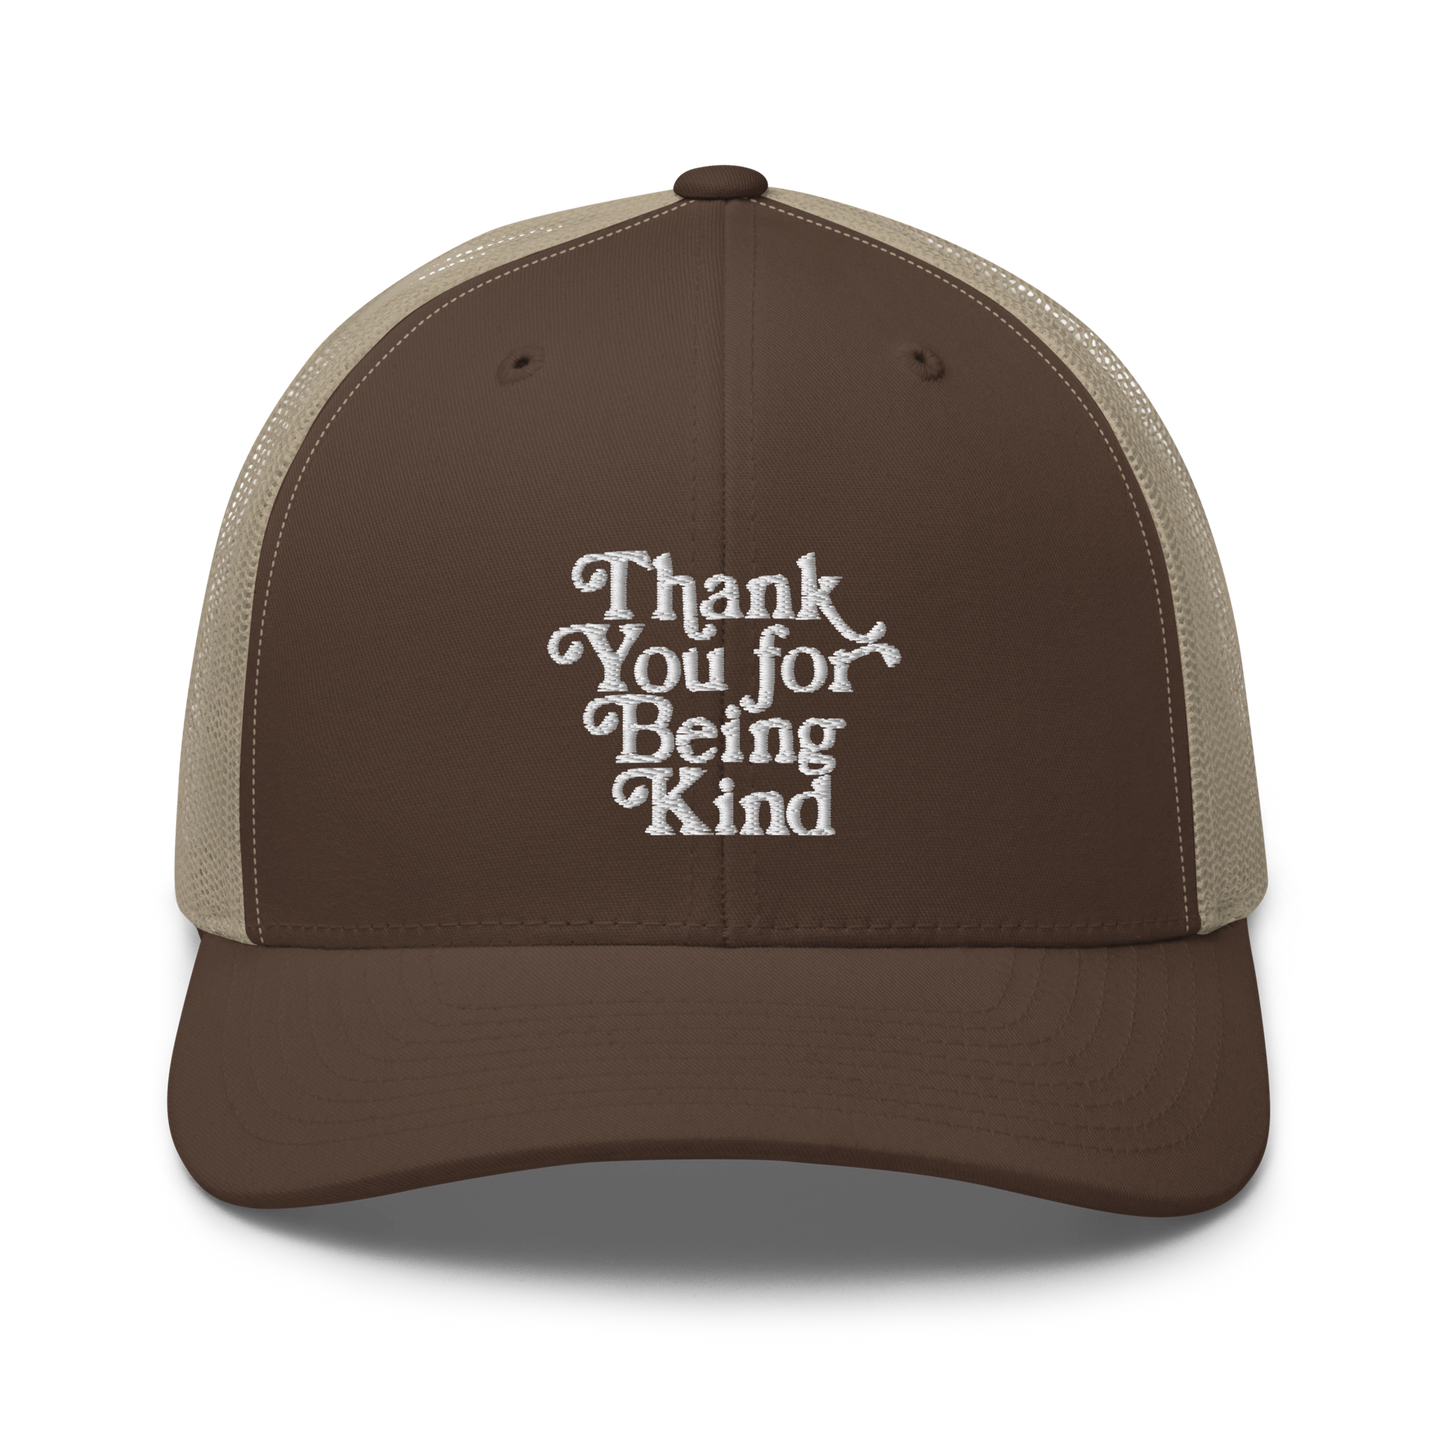 Thank You For Being Kind Trucker Cap